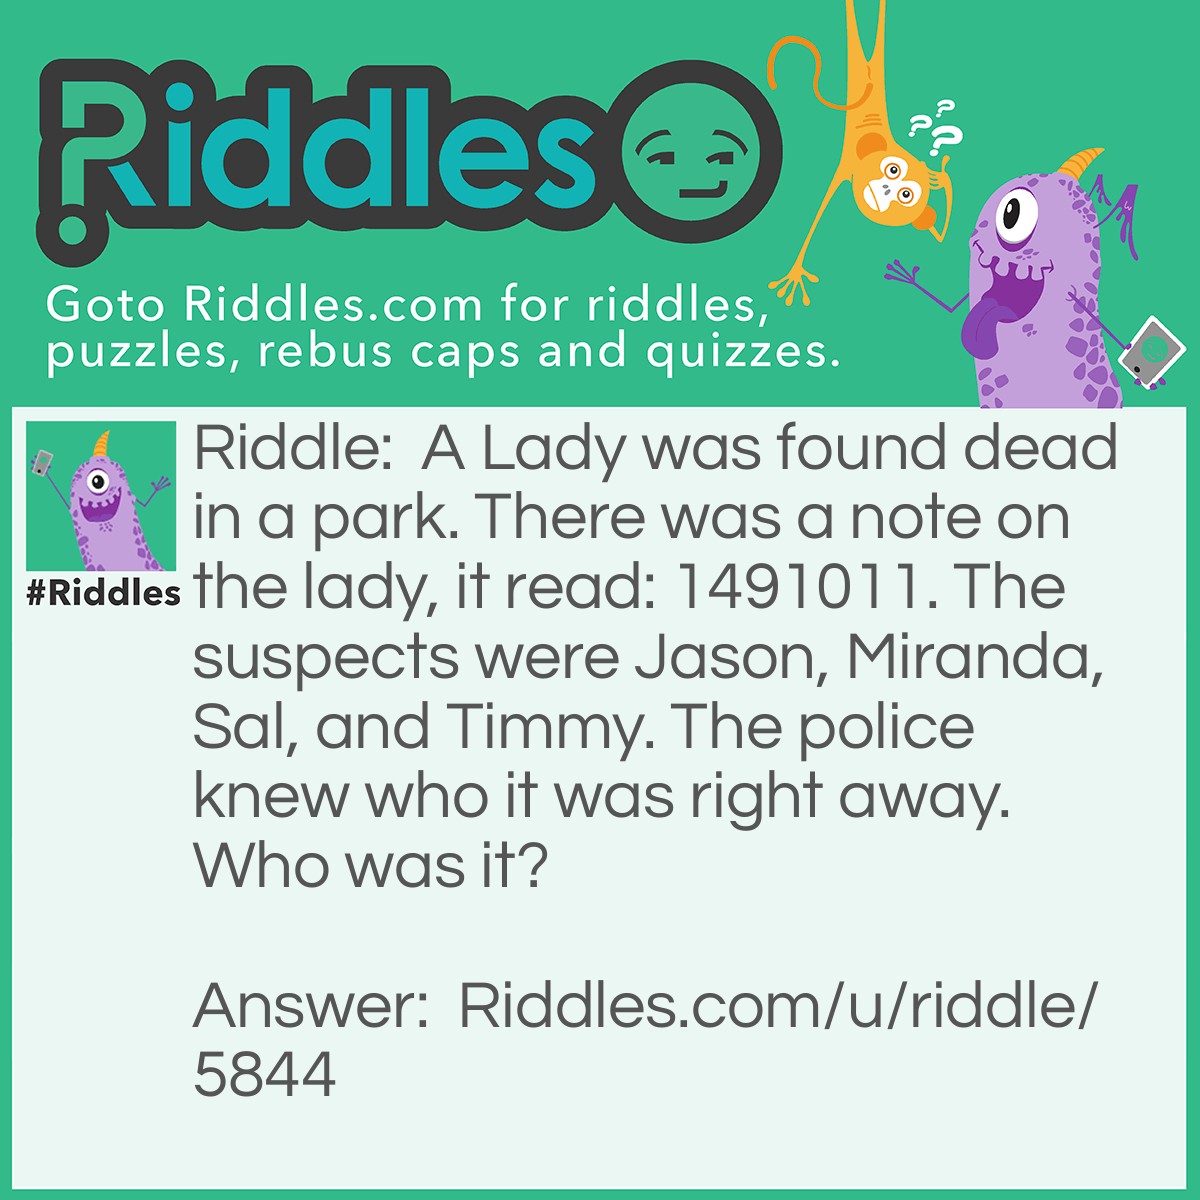 Riddle: A Lady was found dead in a park. There was a note on the lady, it read: 1491011. The suspects were Jason, Miranda, Sal, and Timmy. The police knew who it was right away. Who was it? Answer: Jason. 1= January 4= April 9= September 10= October 11= November. The First Letter Of Each Month Ends Up Spelling Jason.